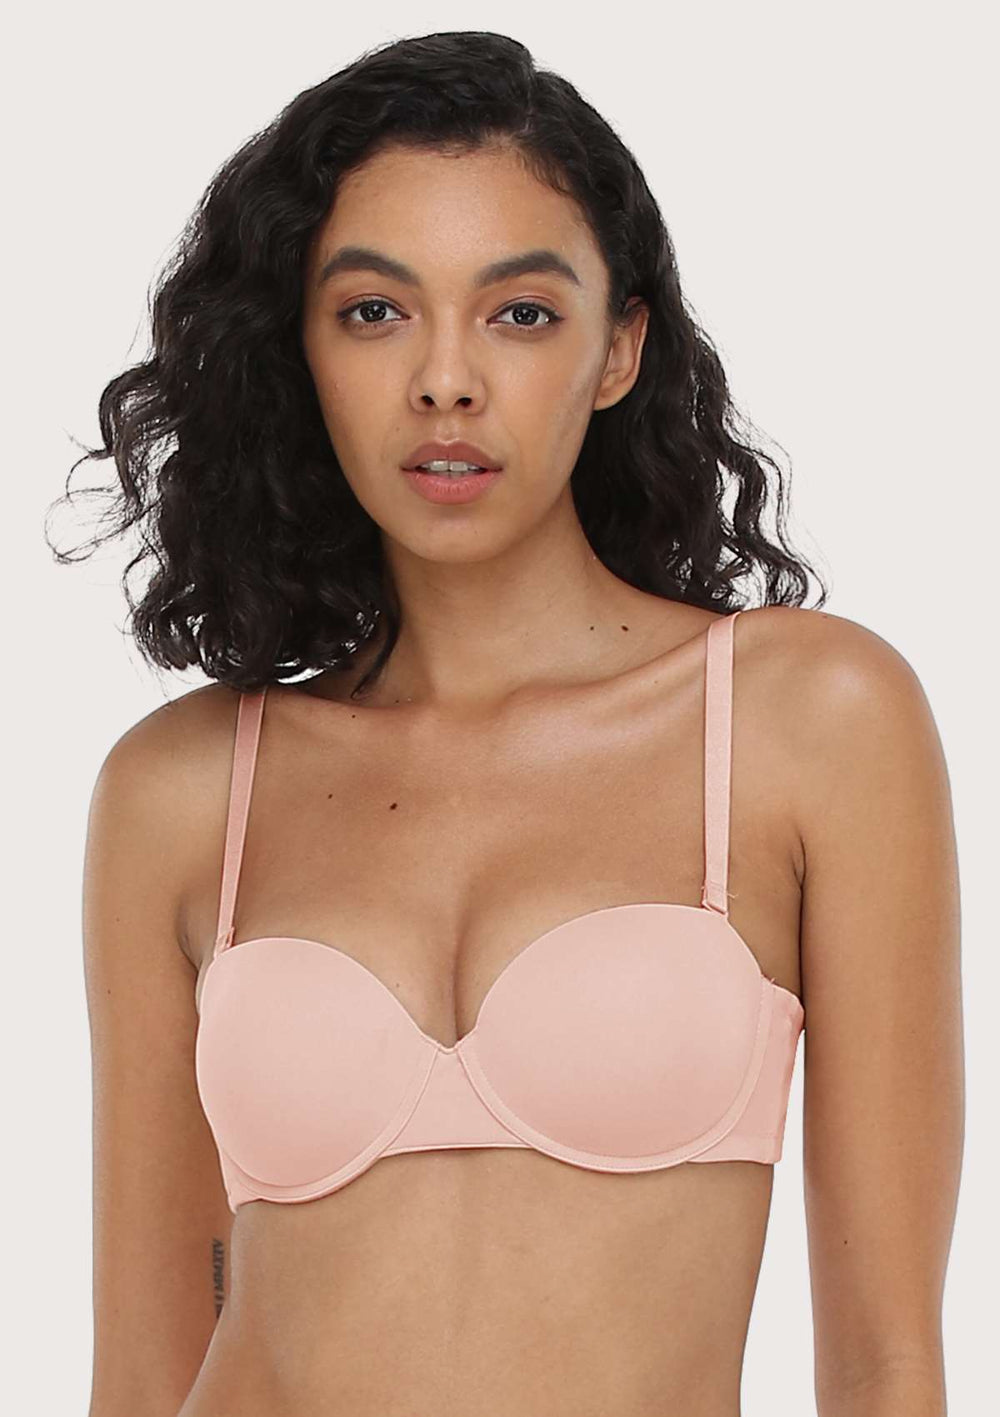 Shop Strapless Push Up Bra For Small Boobs With Foam with great